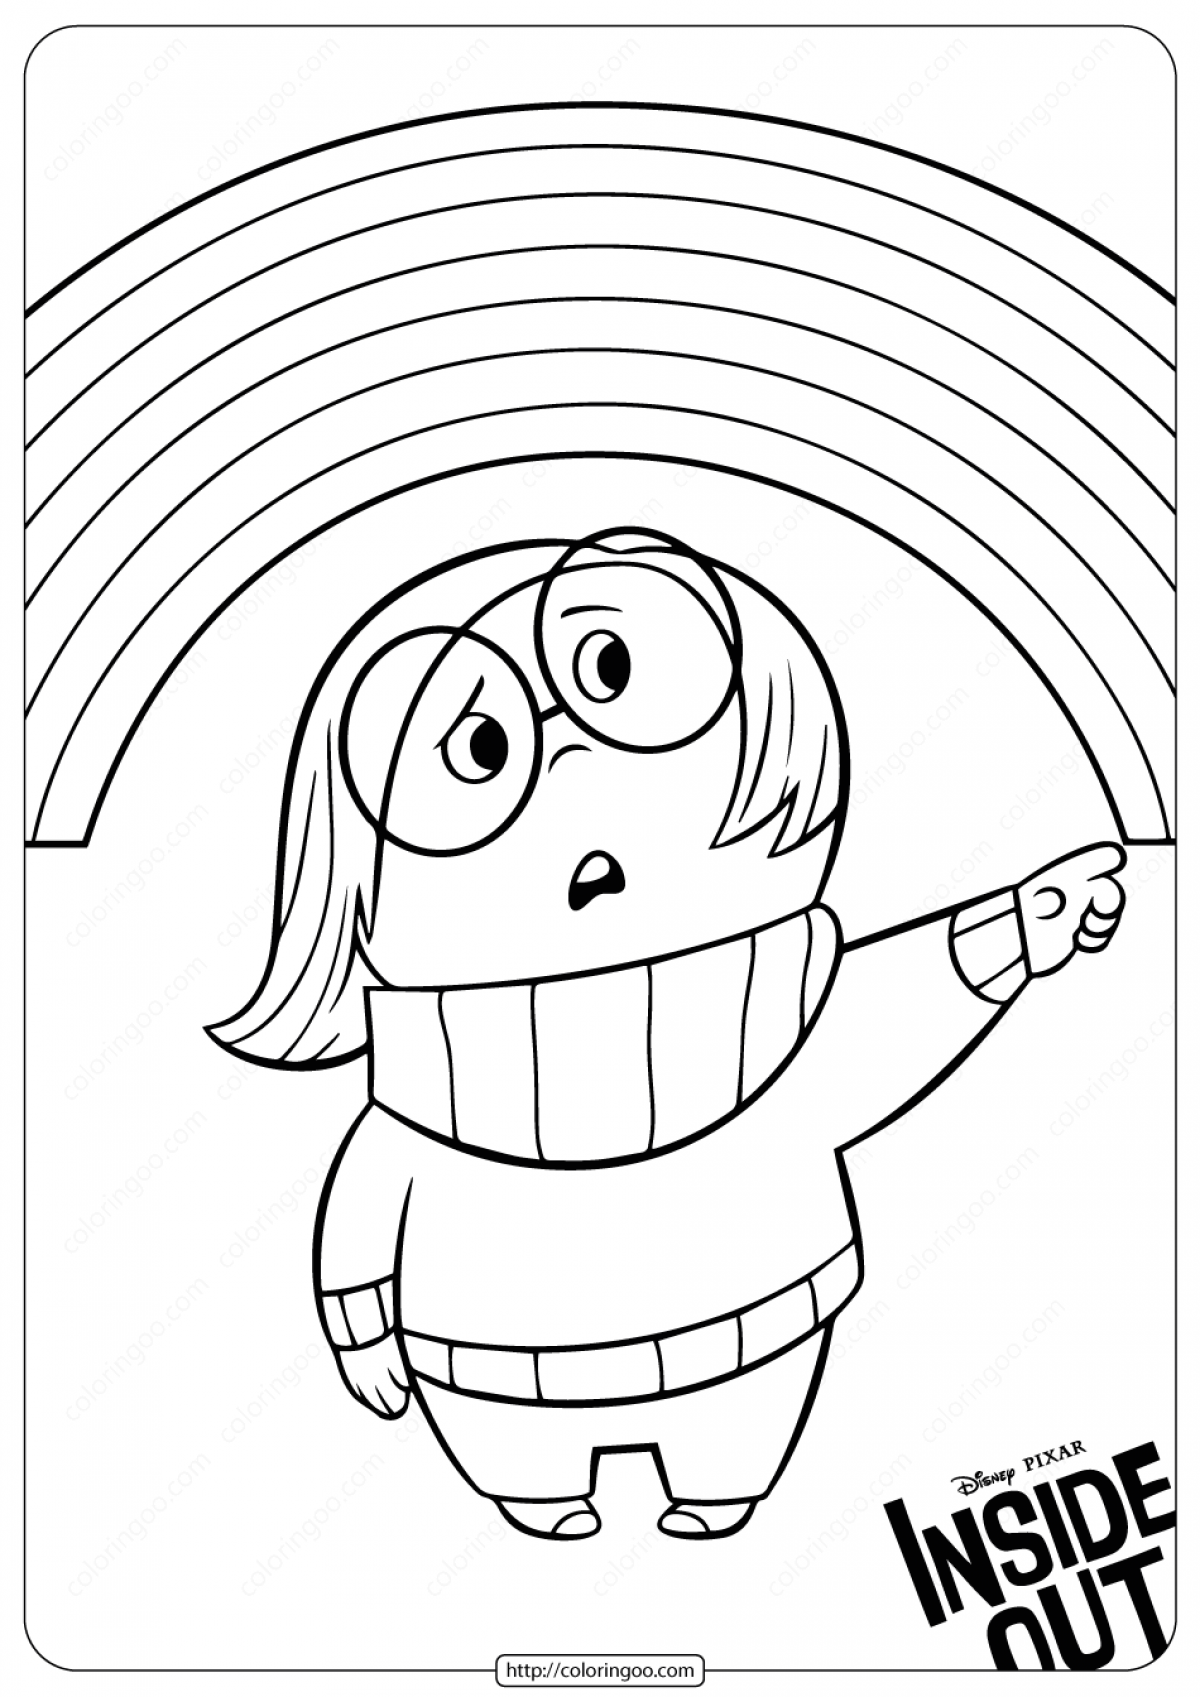 Sadness Coloring Pages - Coloring Home